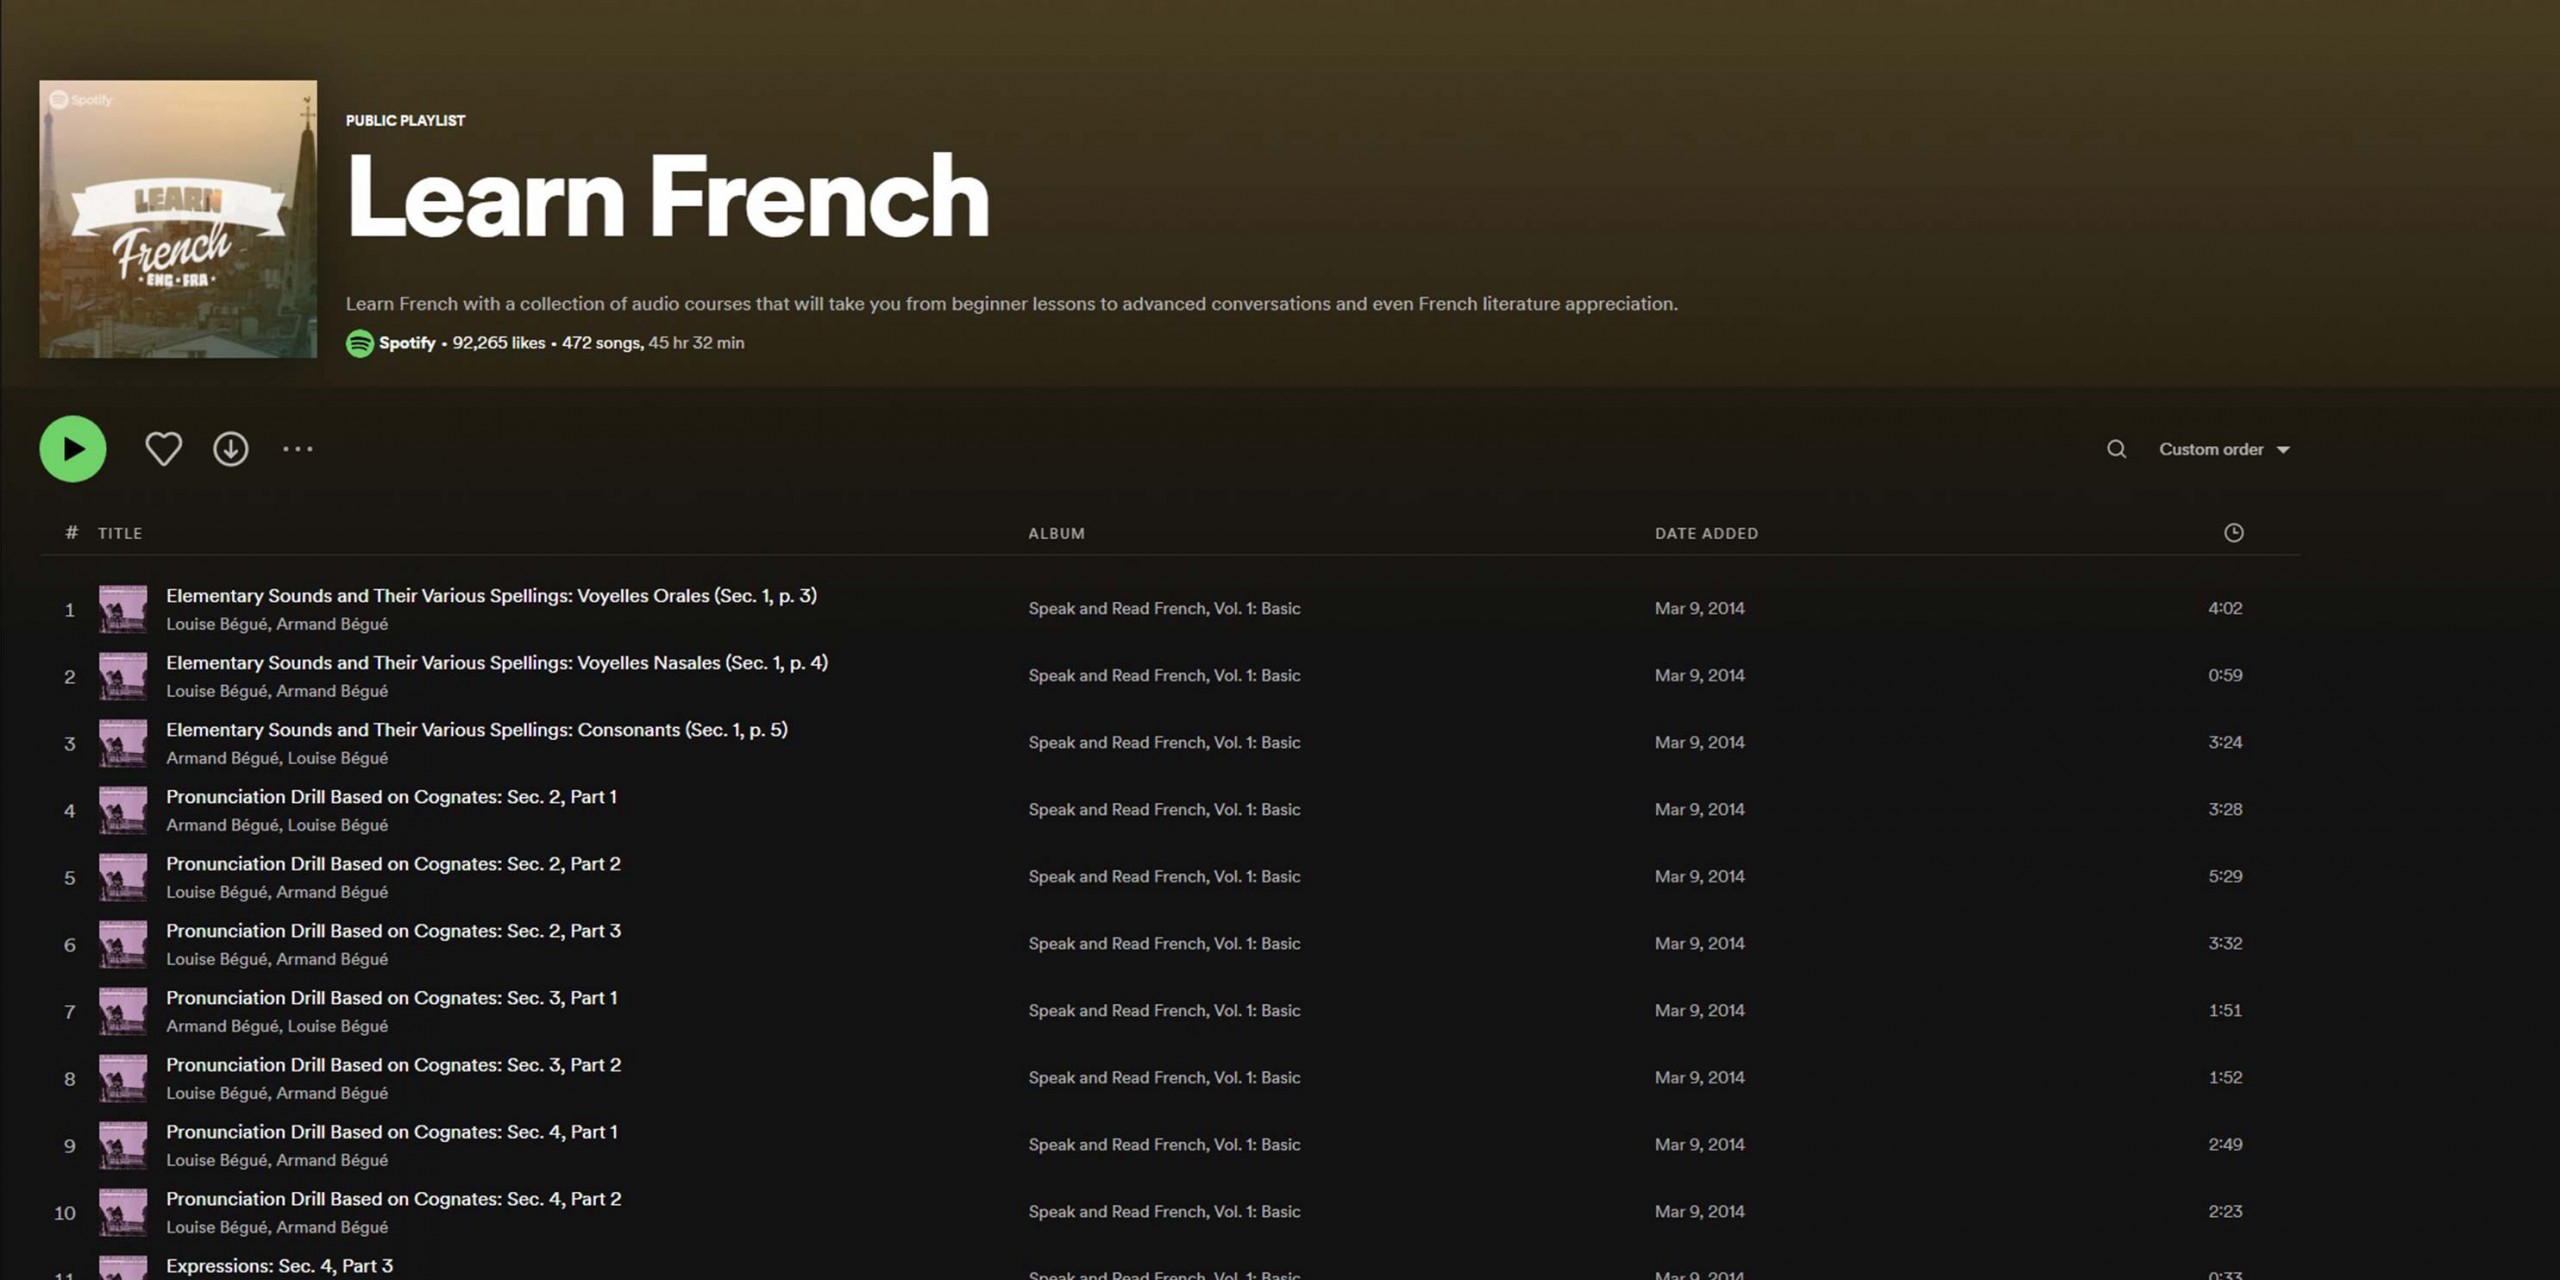 Image of a screenshot from the Spotify app, showing a French learning playlist titled 'Learn French with Spotify'. The playlist includes French language songs and podcasts, such as 'Je suis', 'French Pod 101', and 'La Vie en Rose', among others.